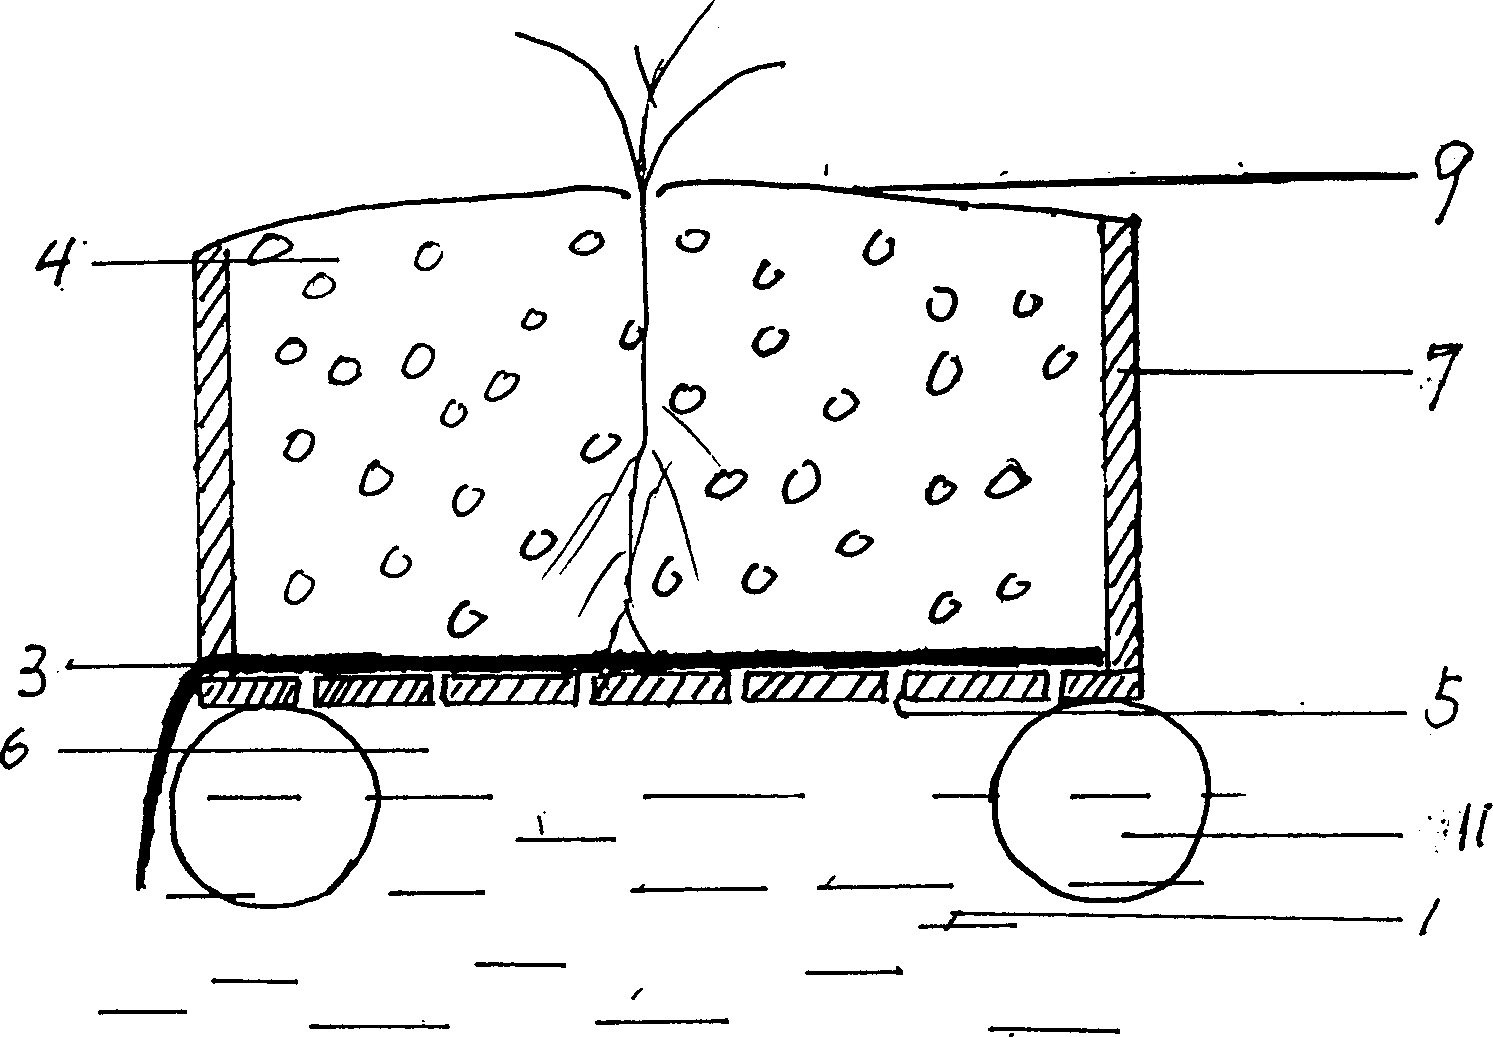 Method for cultivation of crops